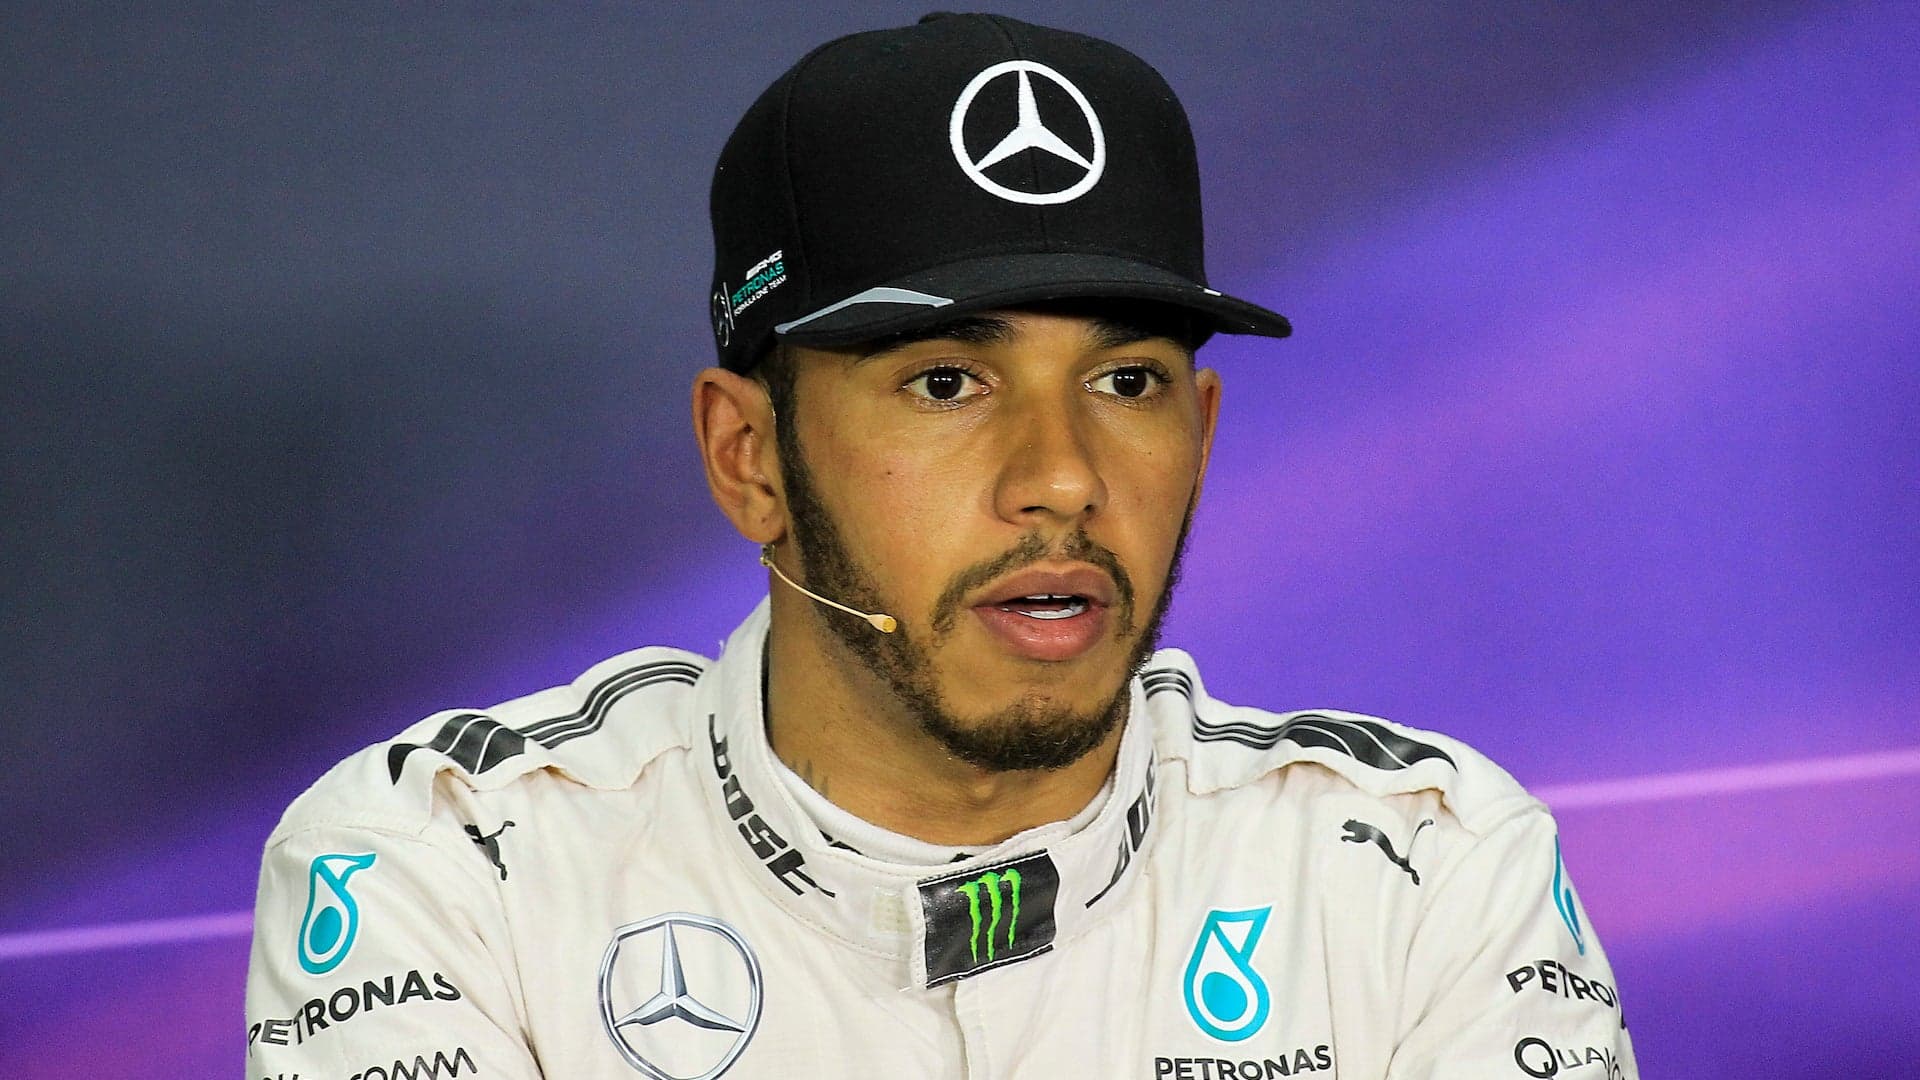 Lewis Hamilton Says New F1 Cars Will Be a “Massive Challenge”